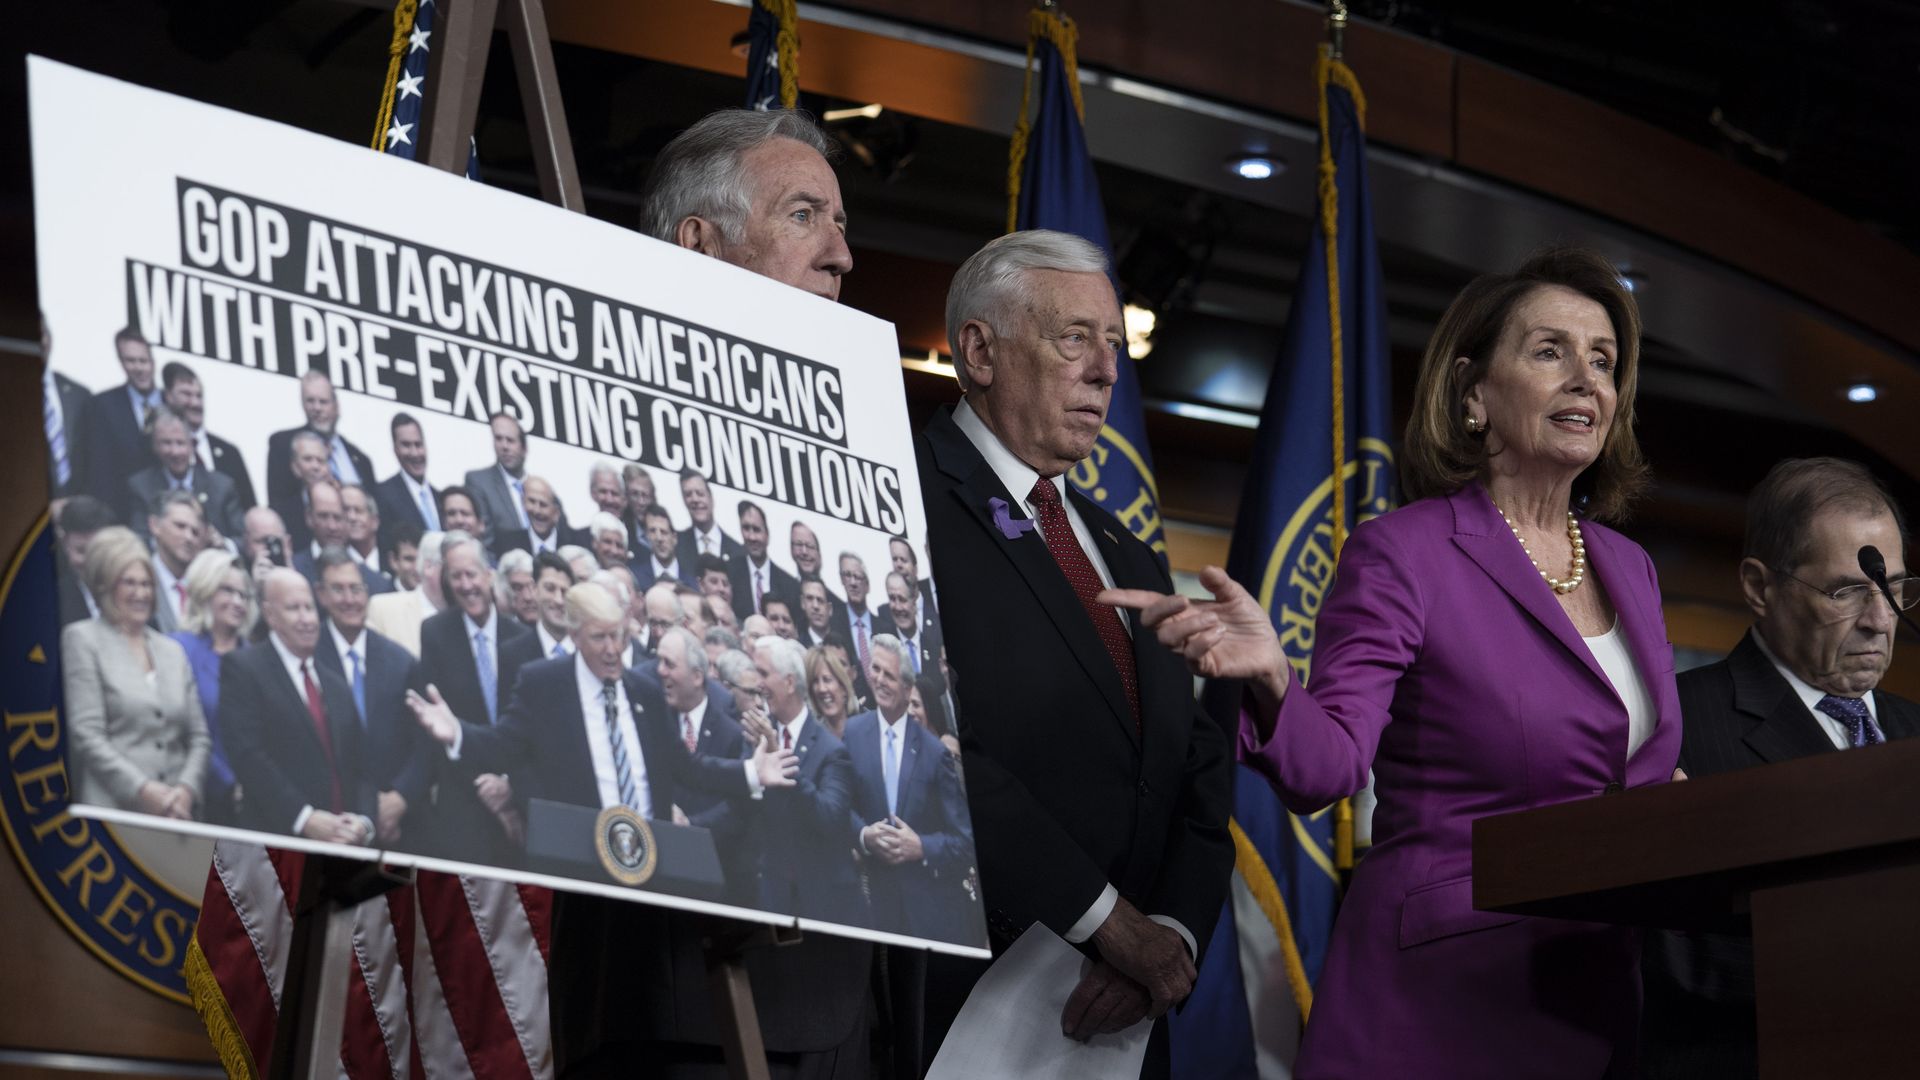 Nancy Pelosi points to a poster about the GOP attacking pre-existing conditions